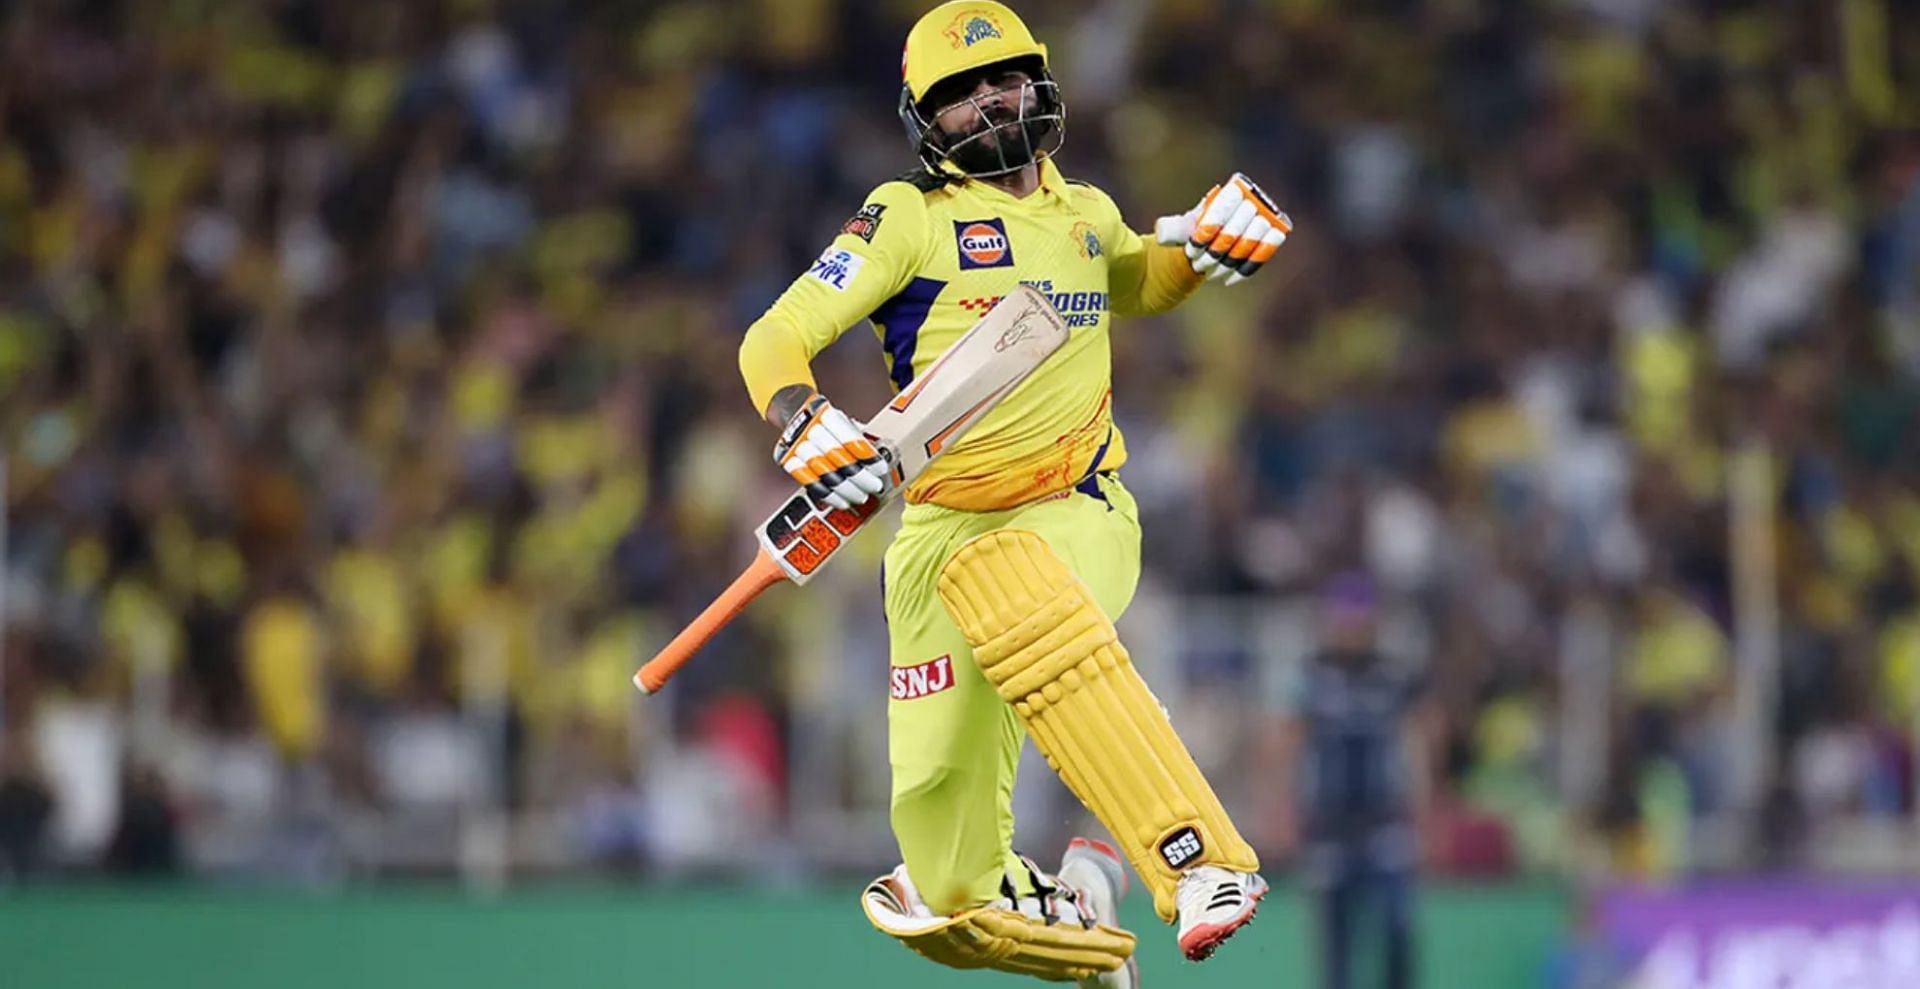 Ravindra Jadeja scored 10 runs off the last two balls to guide CSK to the title. (Credit: BCCI)